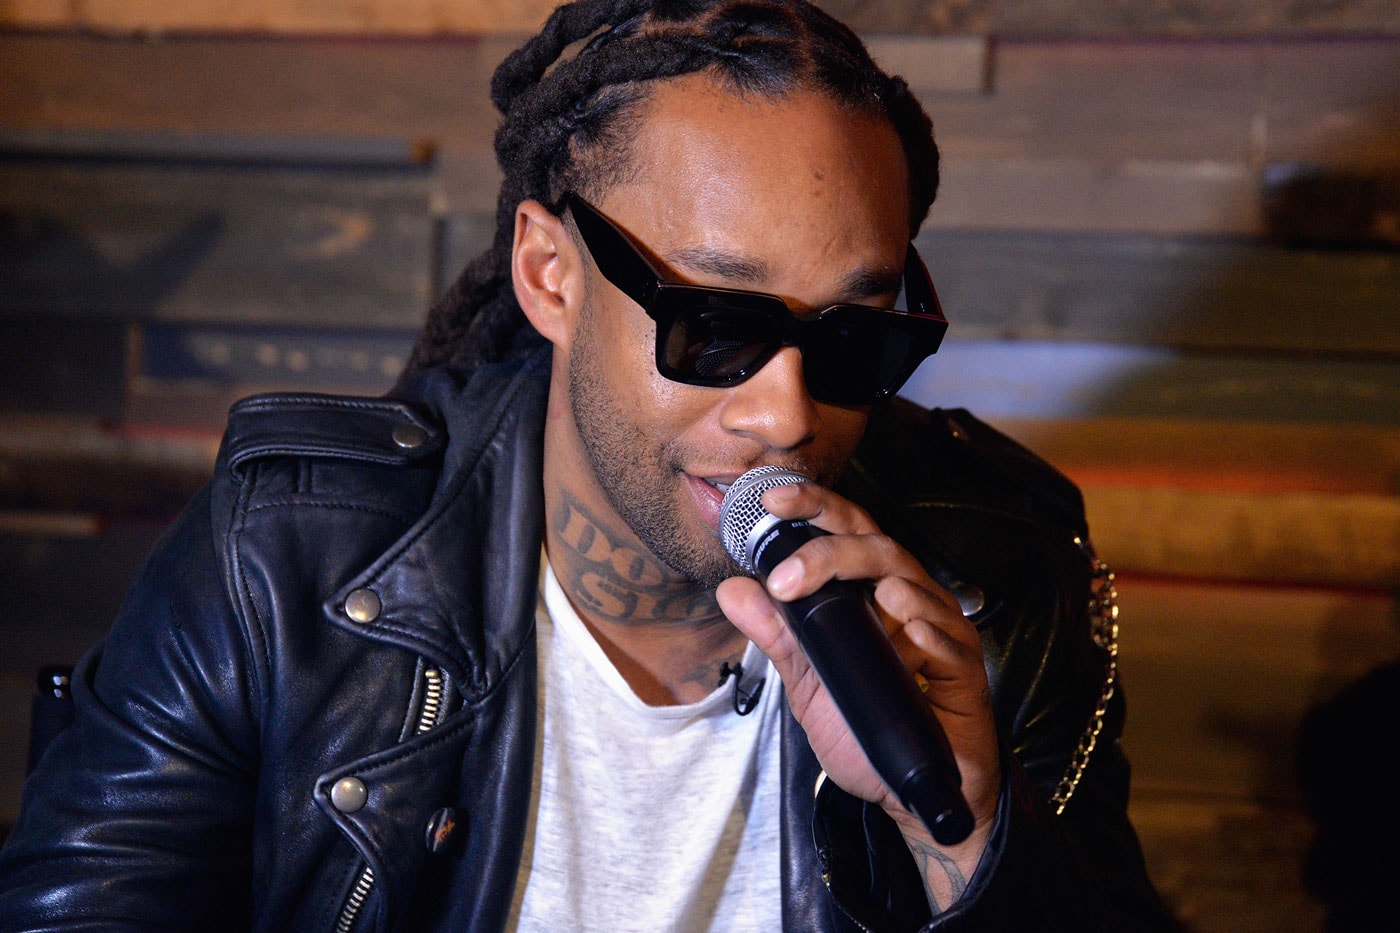 Watch the VHS-Style Video for Ty Dolla $ign's "Blasé" featuring Rae Sremmurd & Future